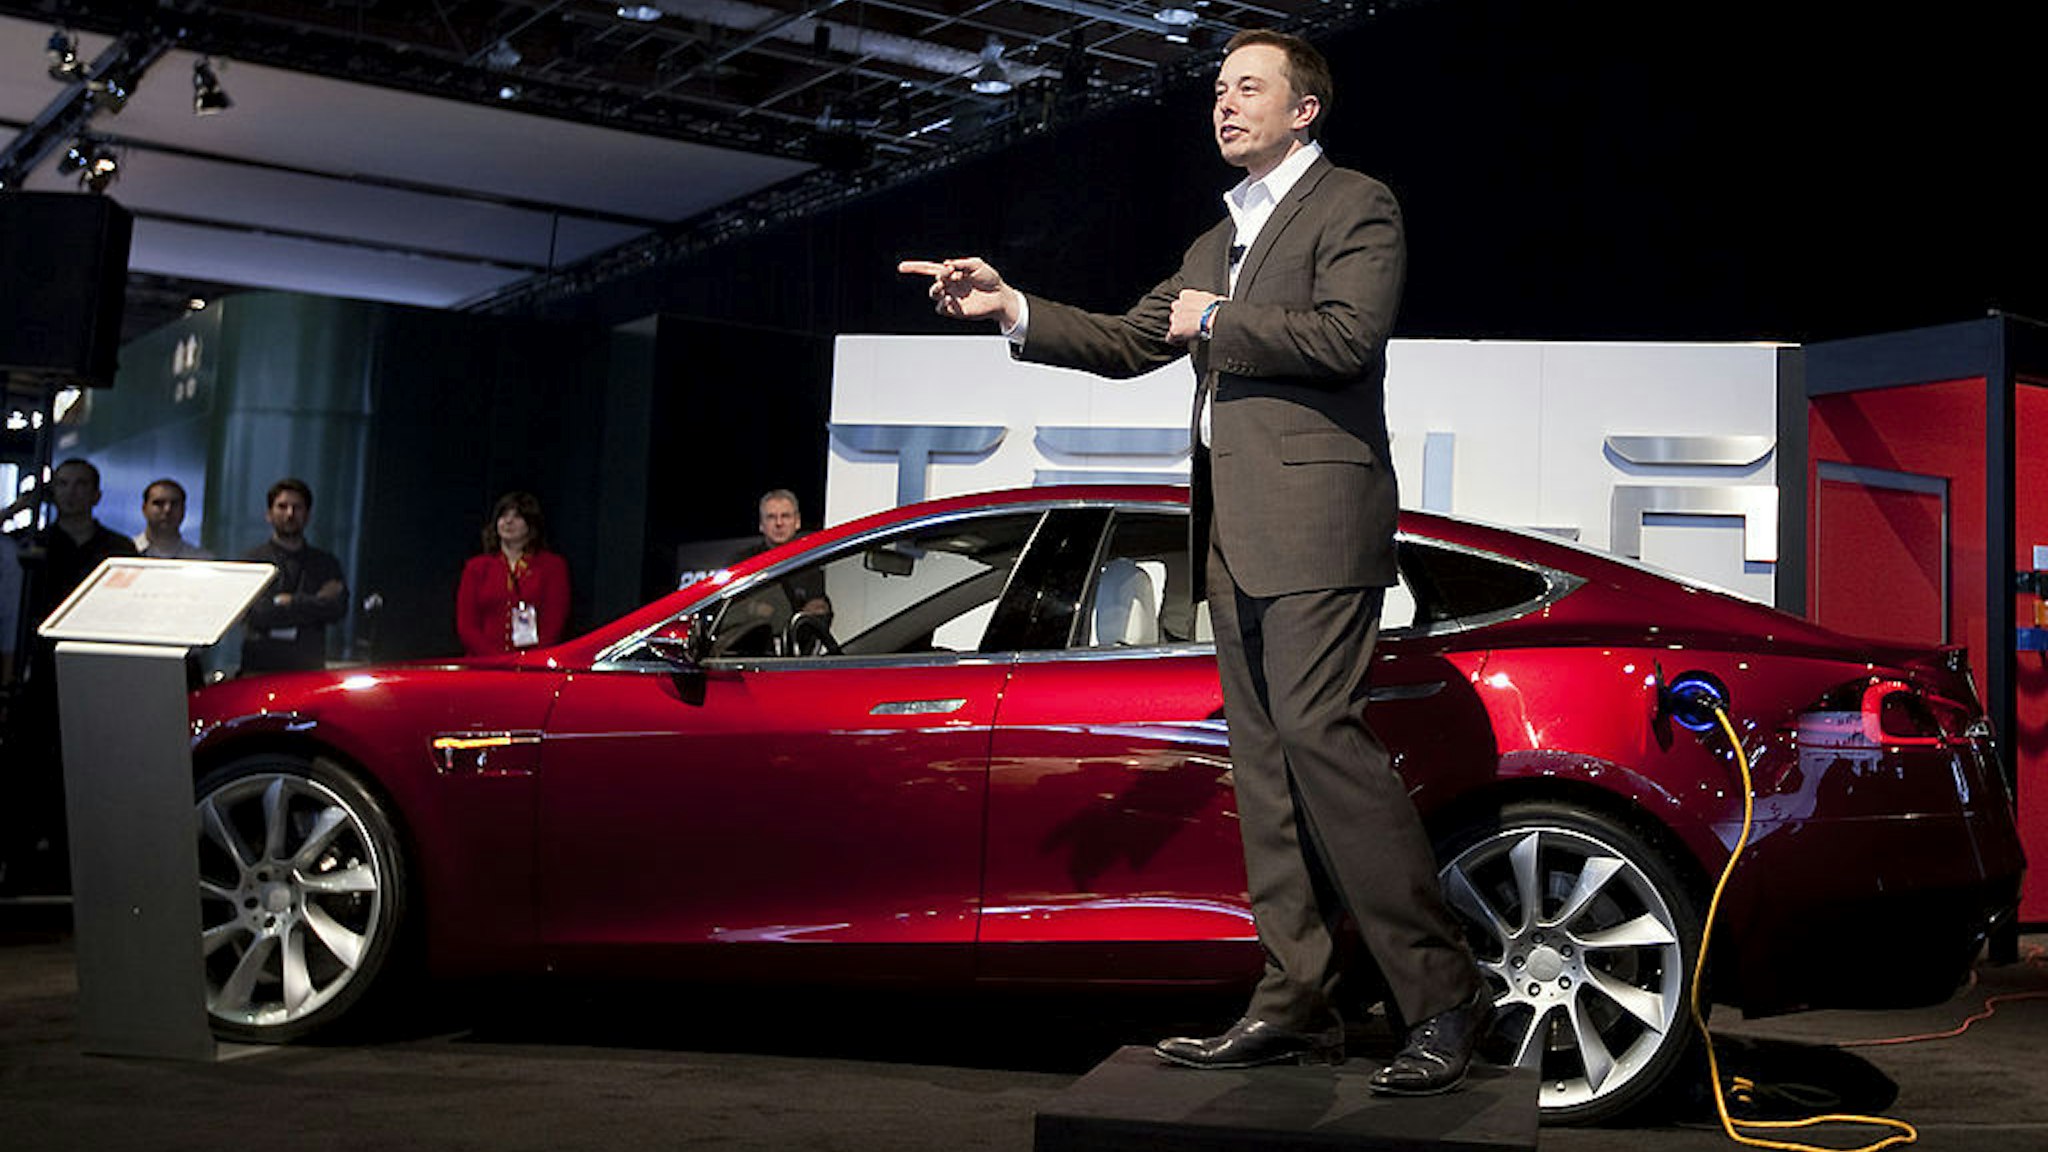 Elon Musk, chairman and chief executive officer of Tesla Motors Inc., speaks in front of a Tesla Model S electric car on day two of the 2010 North American International Auto Show in Detroit, Michigan, U.S., on Tuesday, Jan. 12, 2010. The 2010 Detroit auto show runs through January 24 and features 60 new vehicle premieres. Photographer: Daniel Acker/Bloomberg via Getty Images